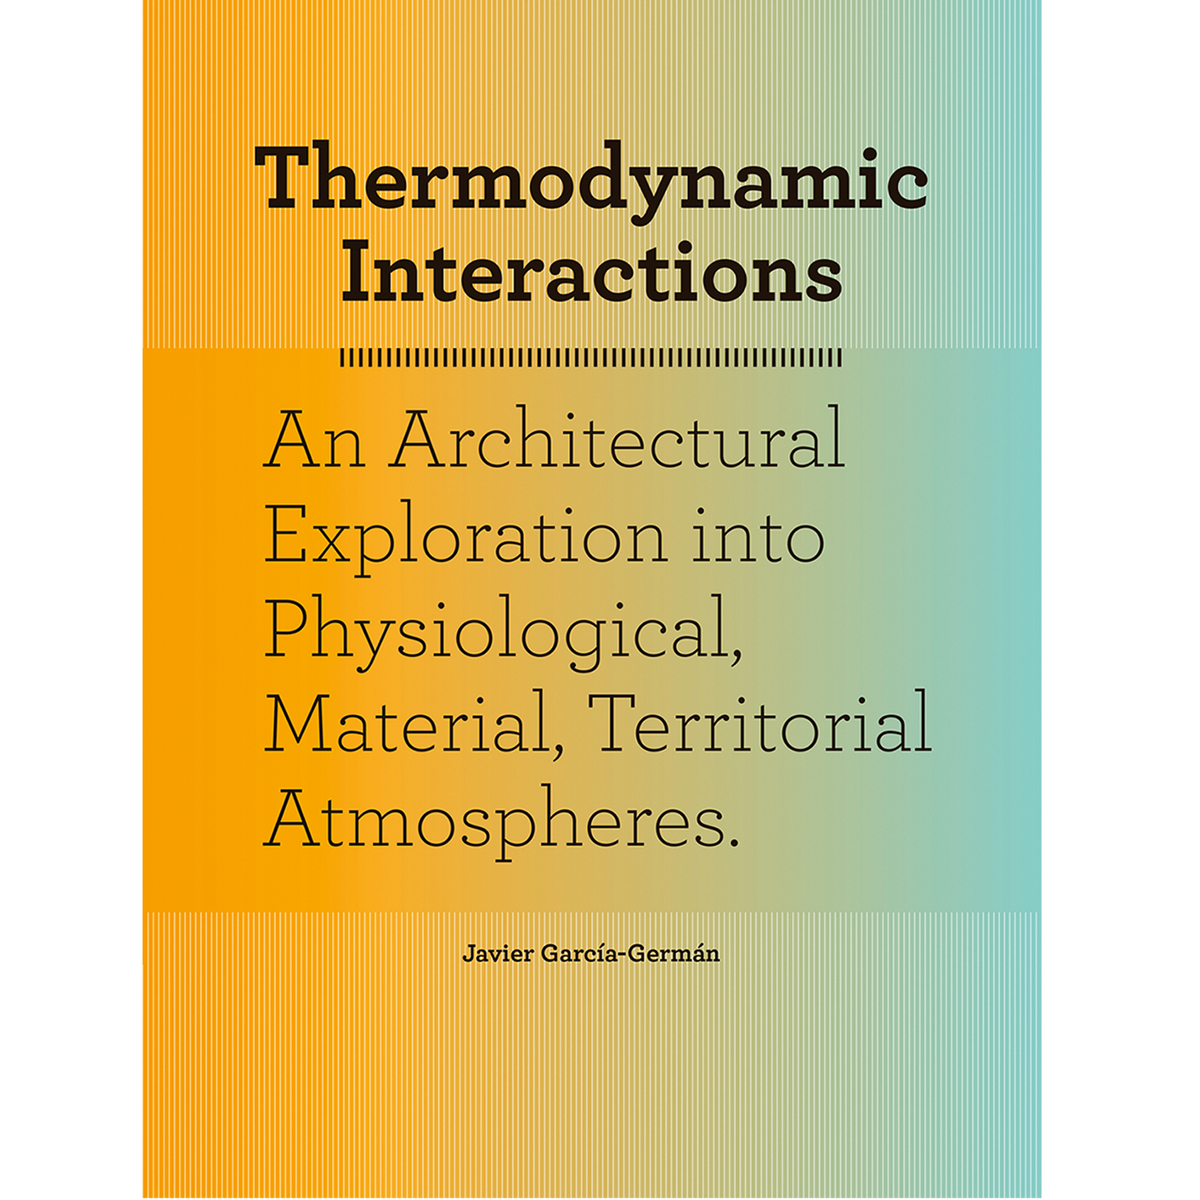 Thermodynamic Interactions